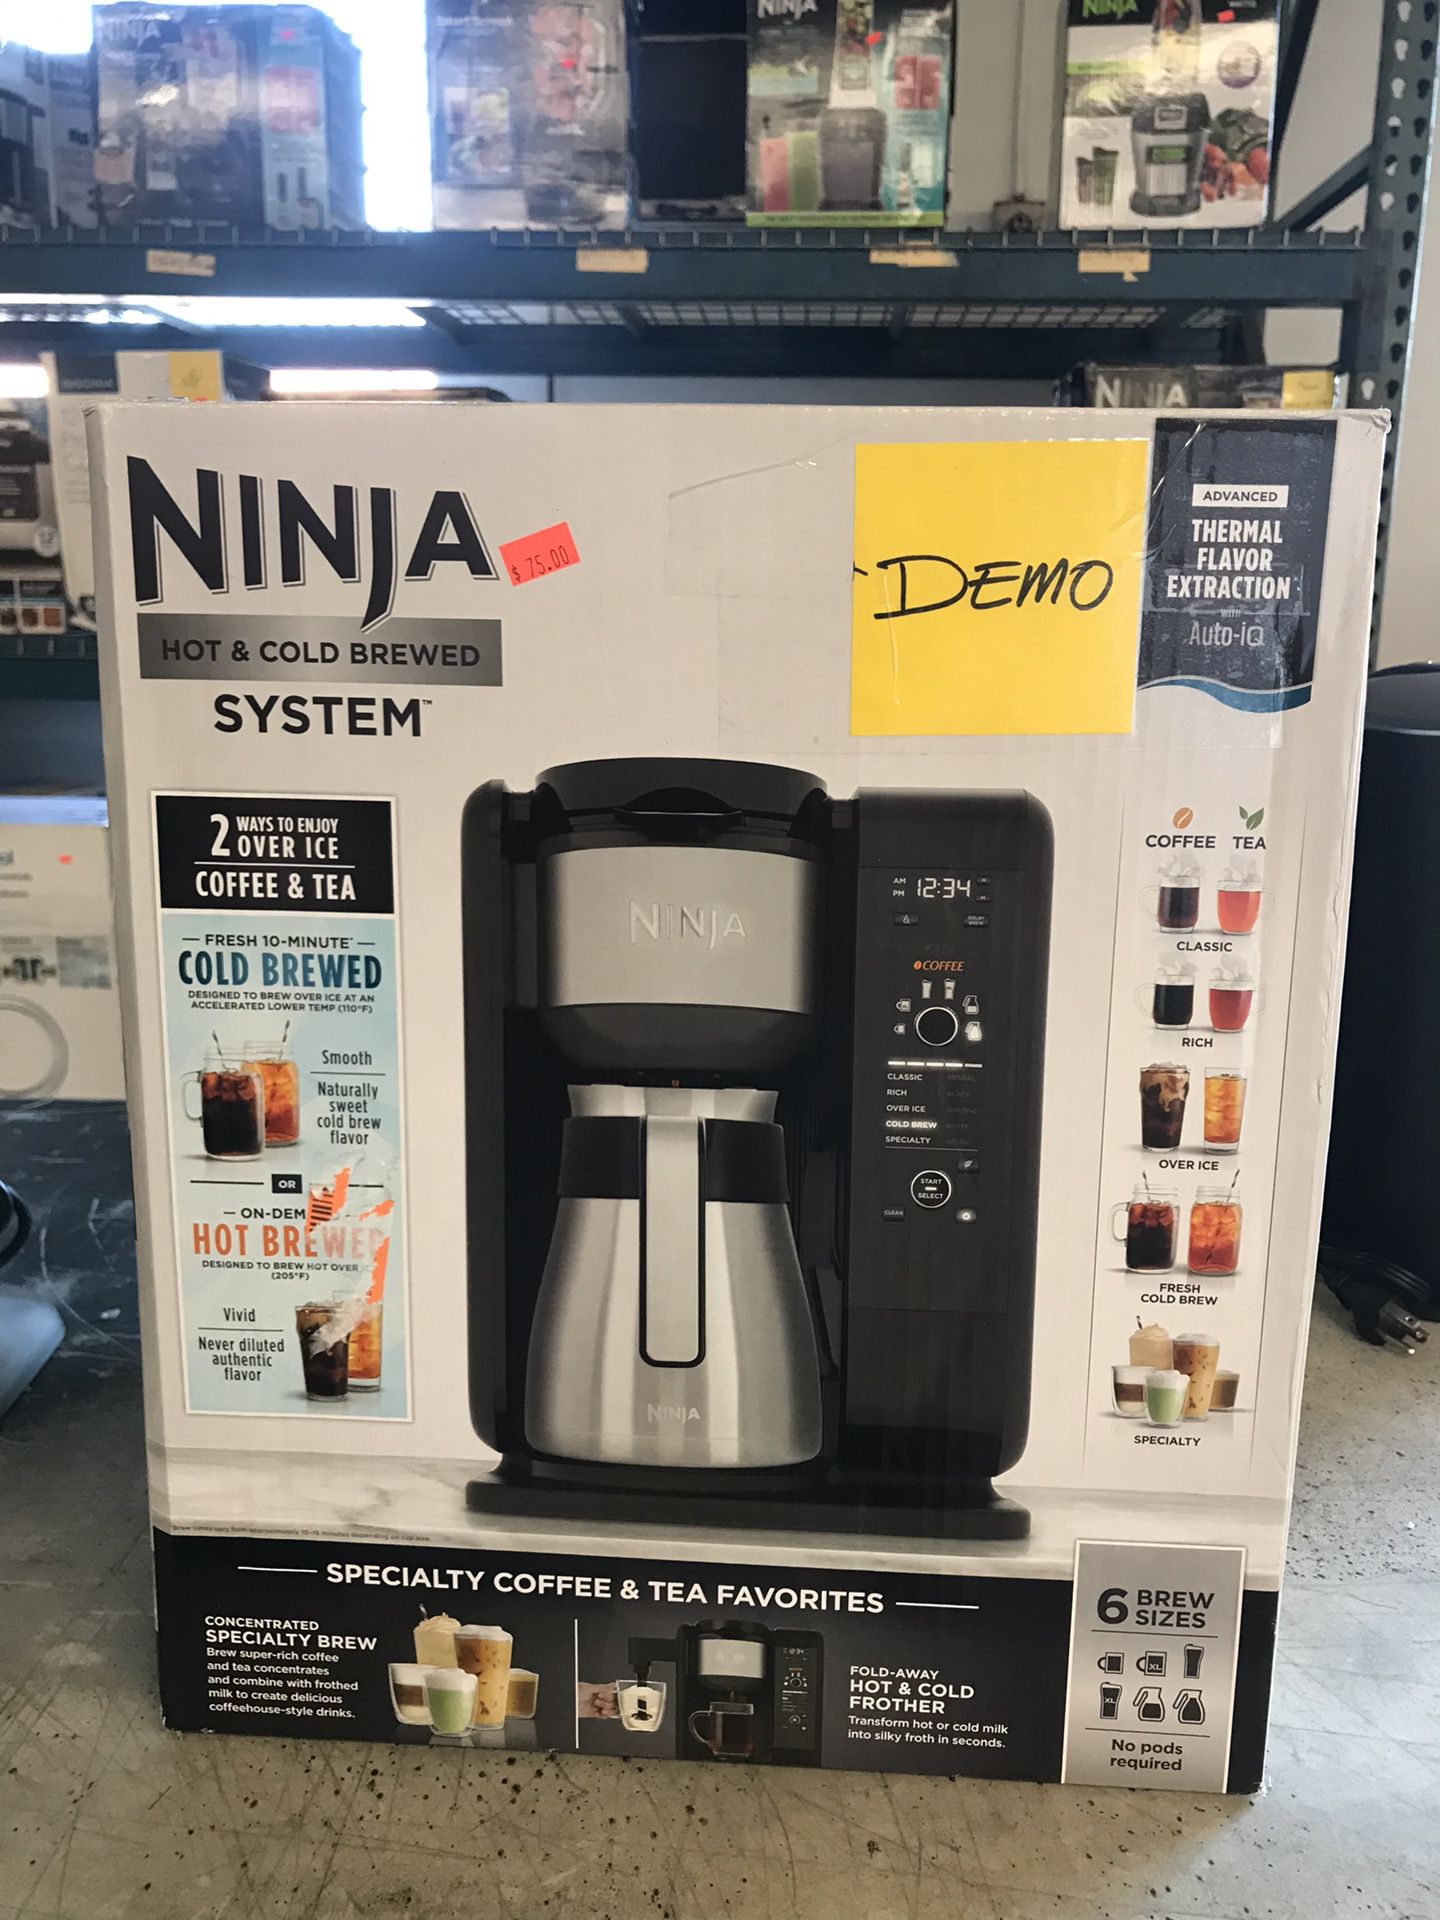 Demo Ninja hot and cold coffee brewer maker with frother for specialty coffee